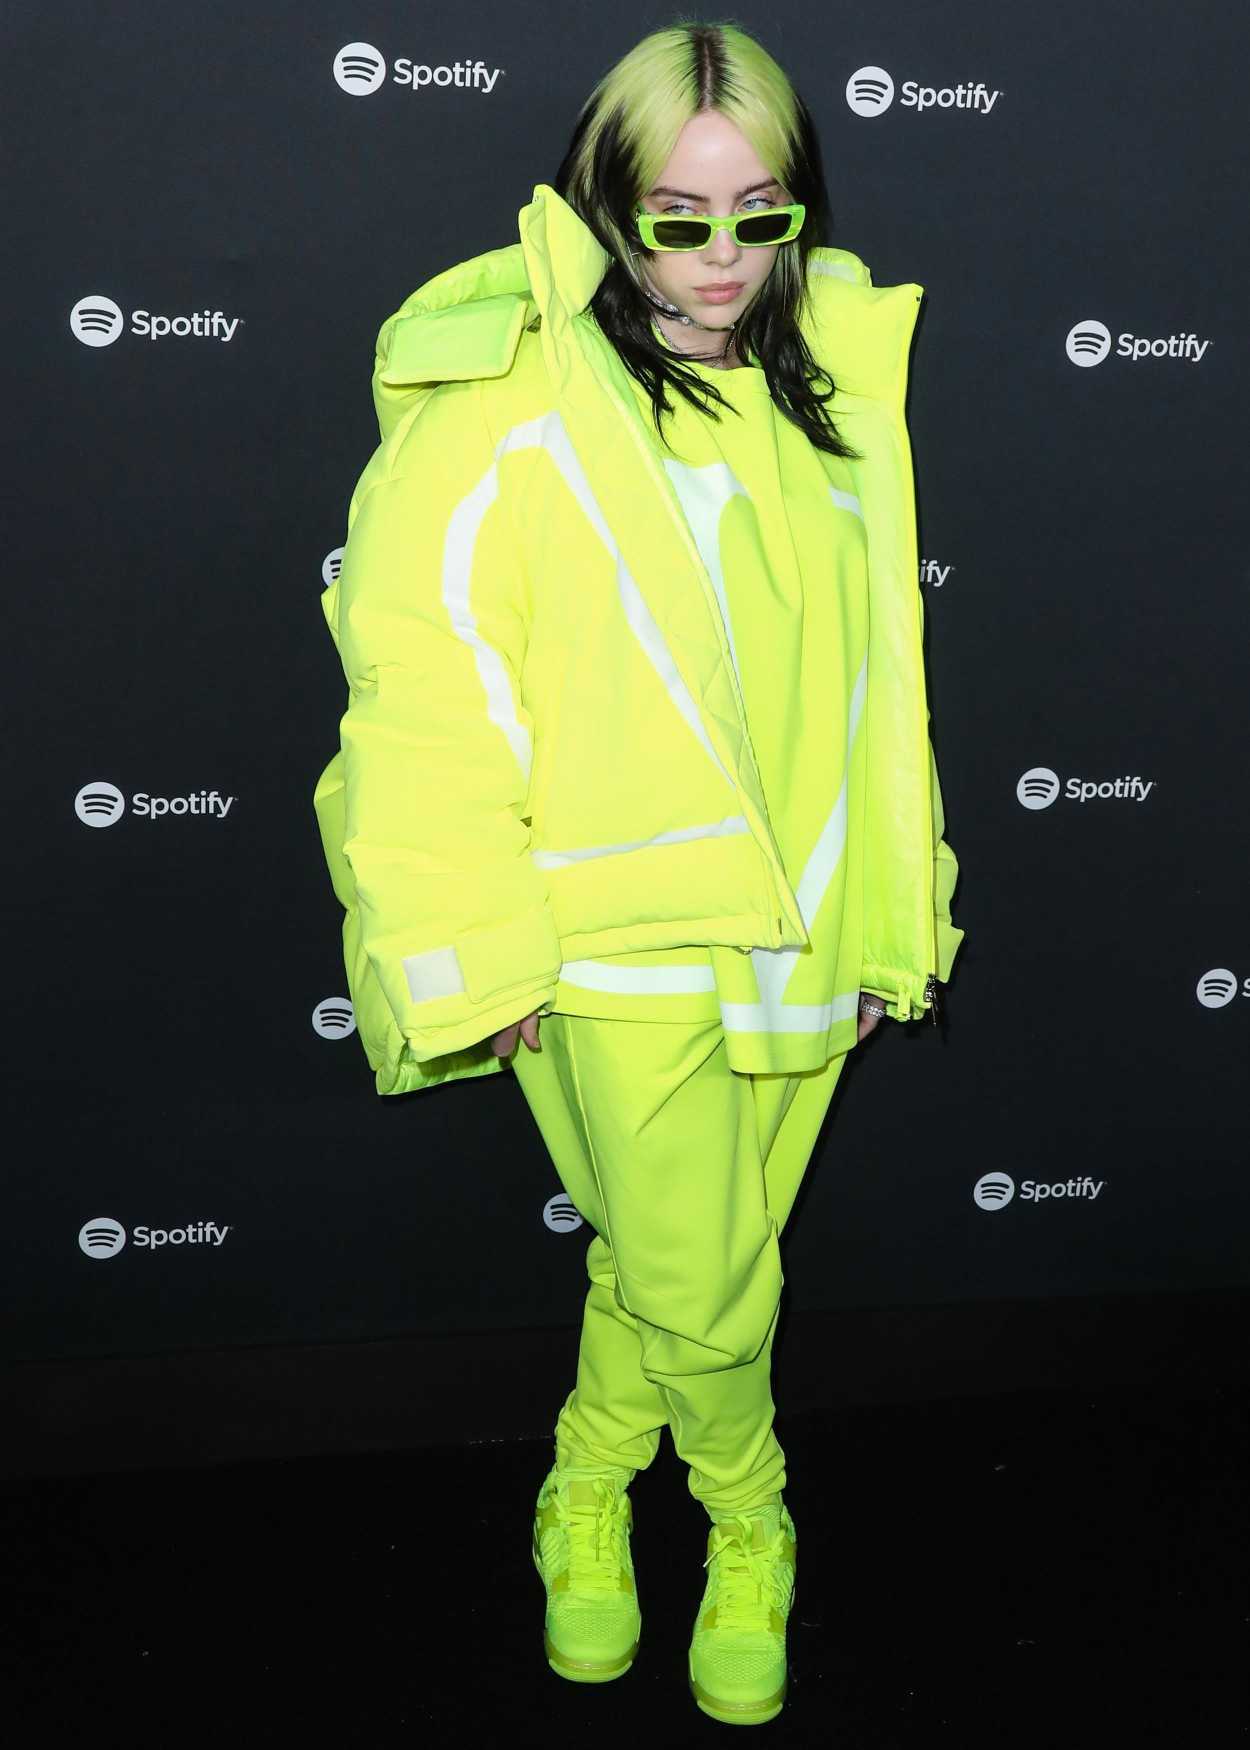 Billie Eilish Attends 2020 Spotify Best New Artist Party in Los Angeles ...